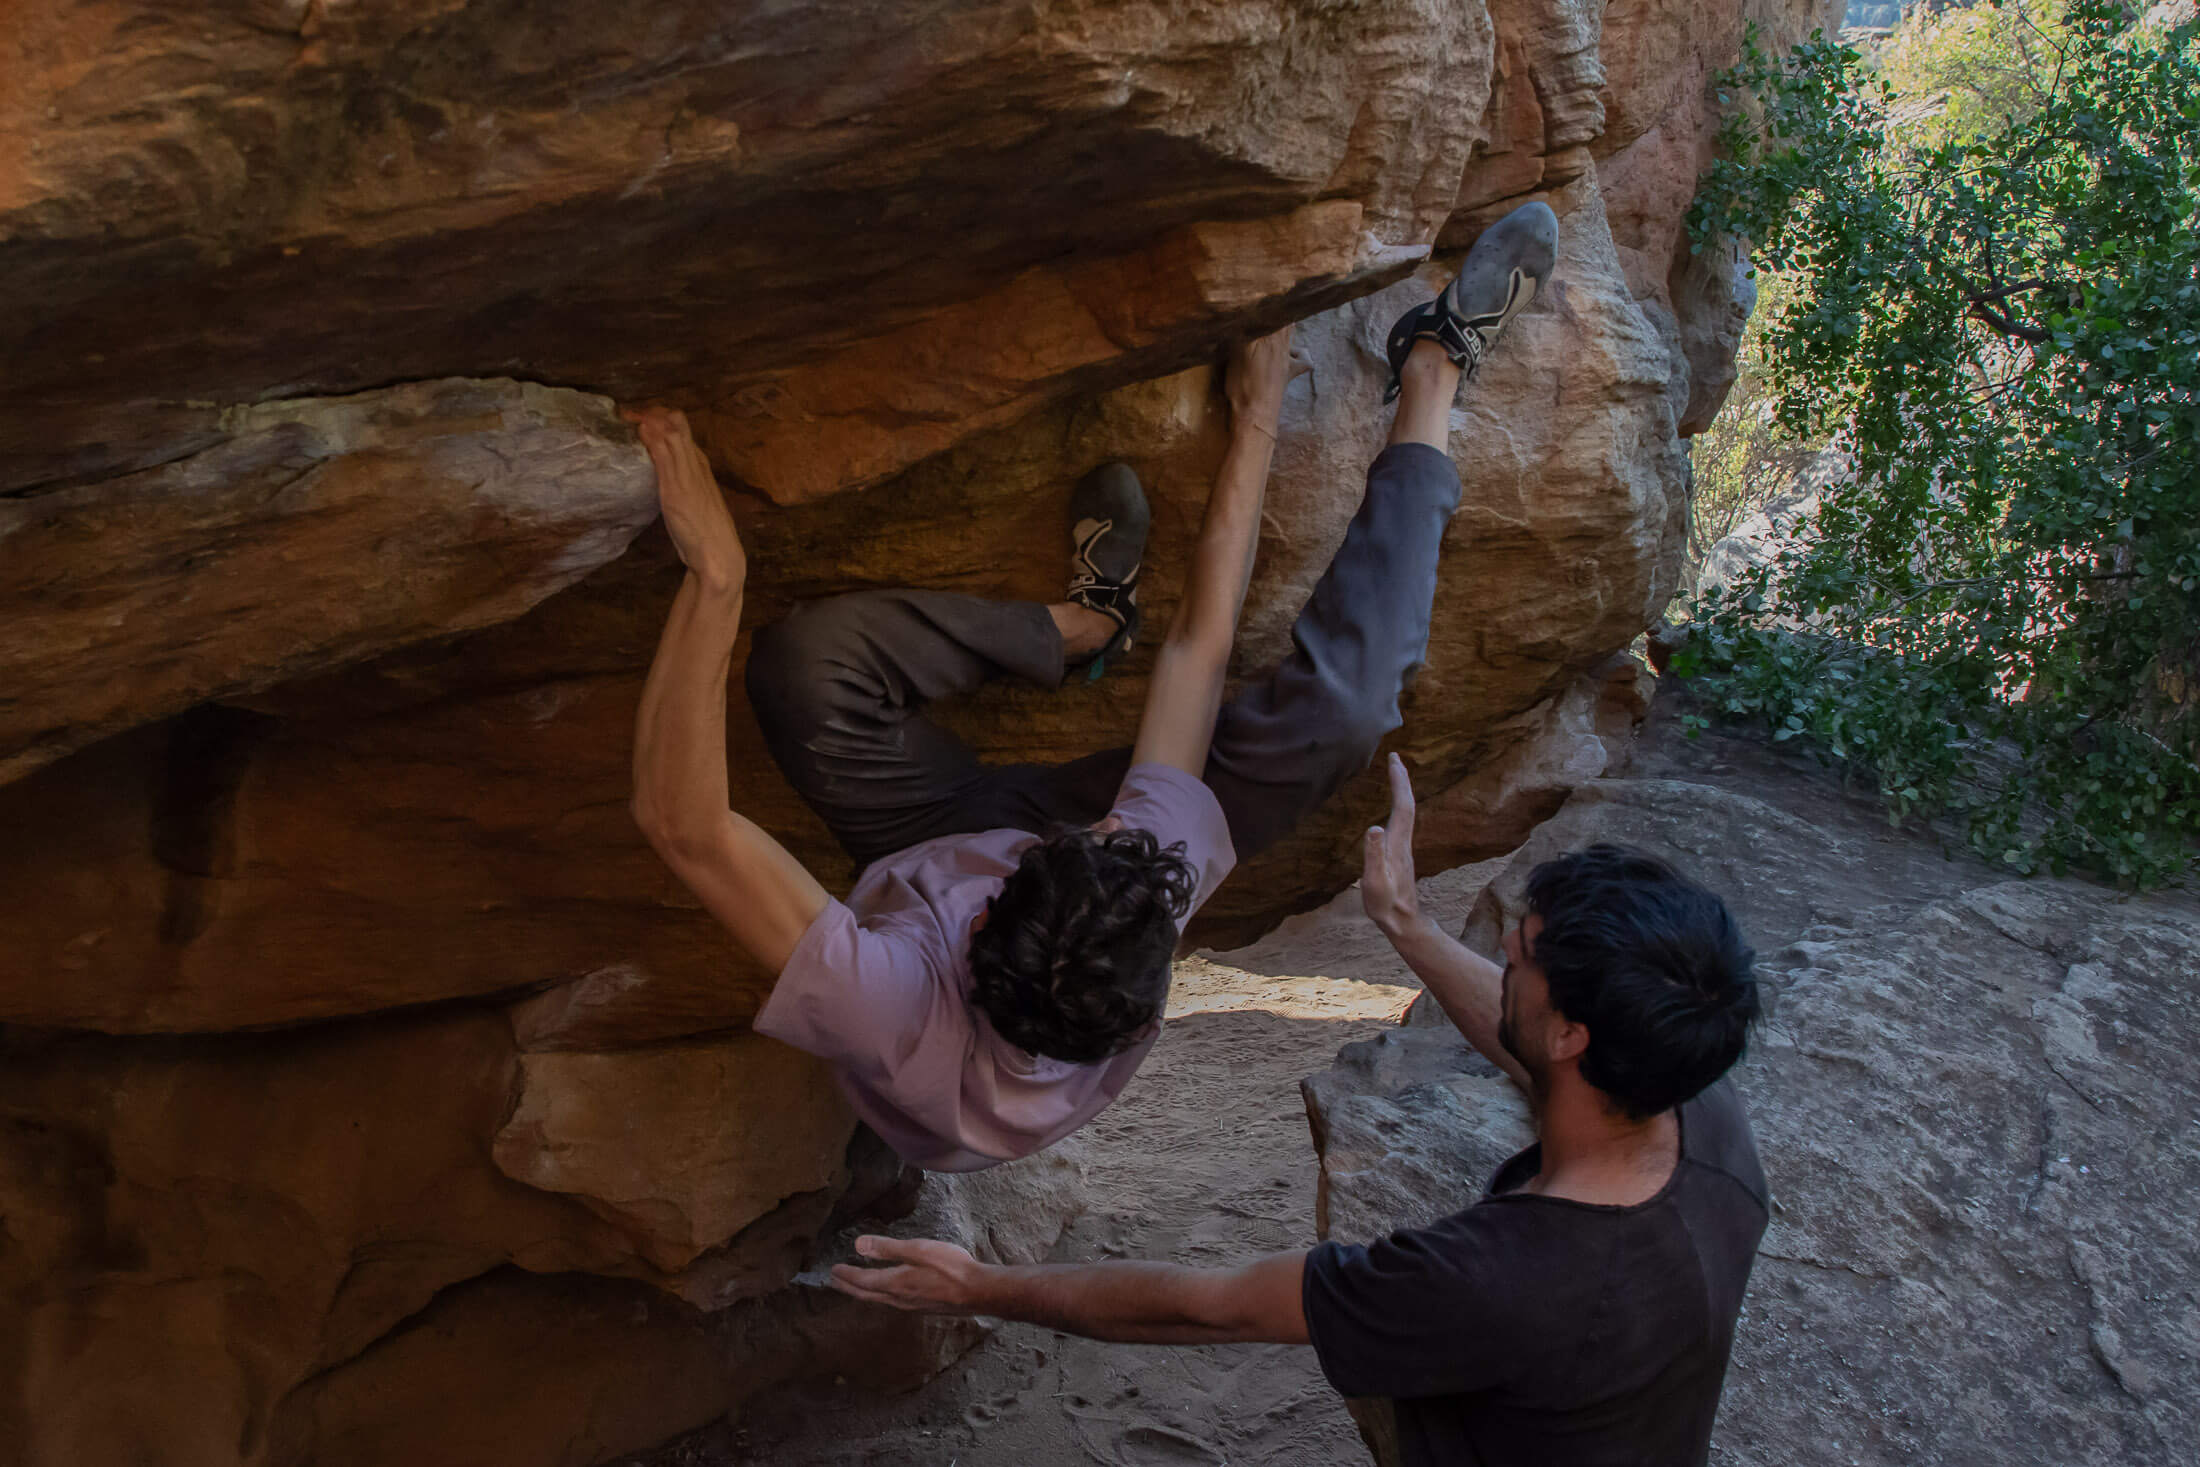 one boulderer spots another